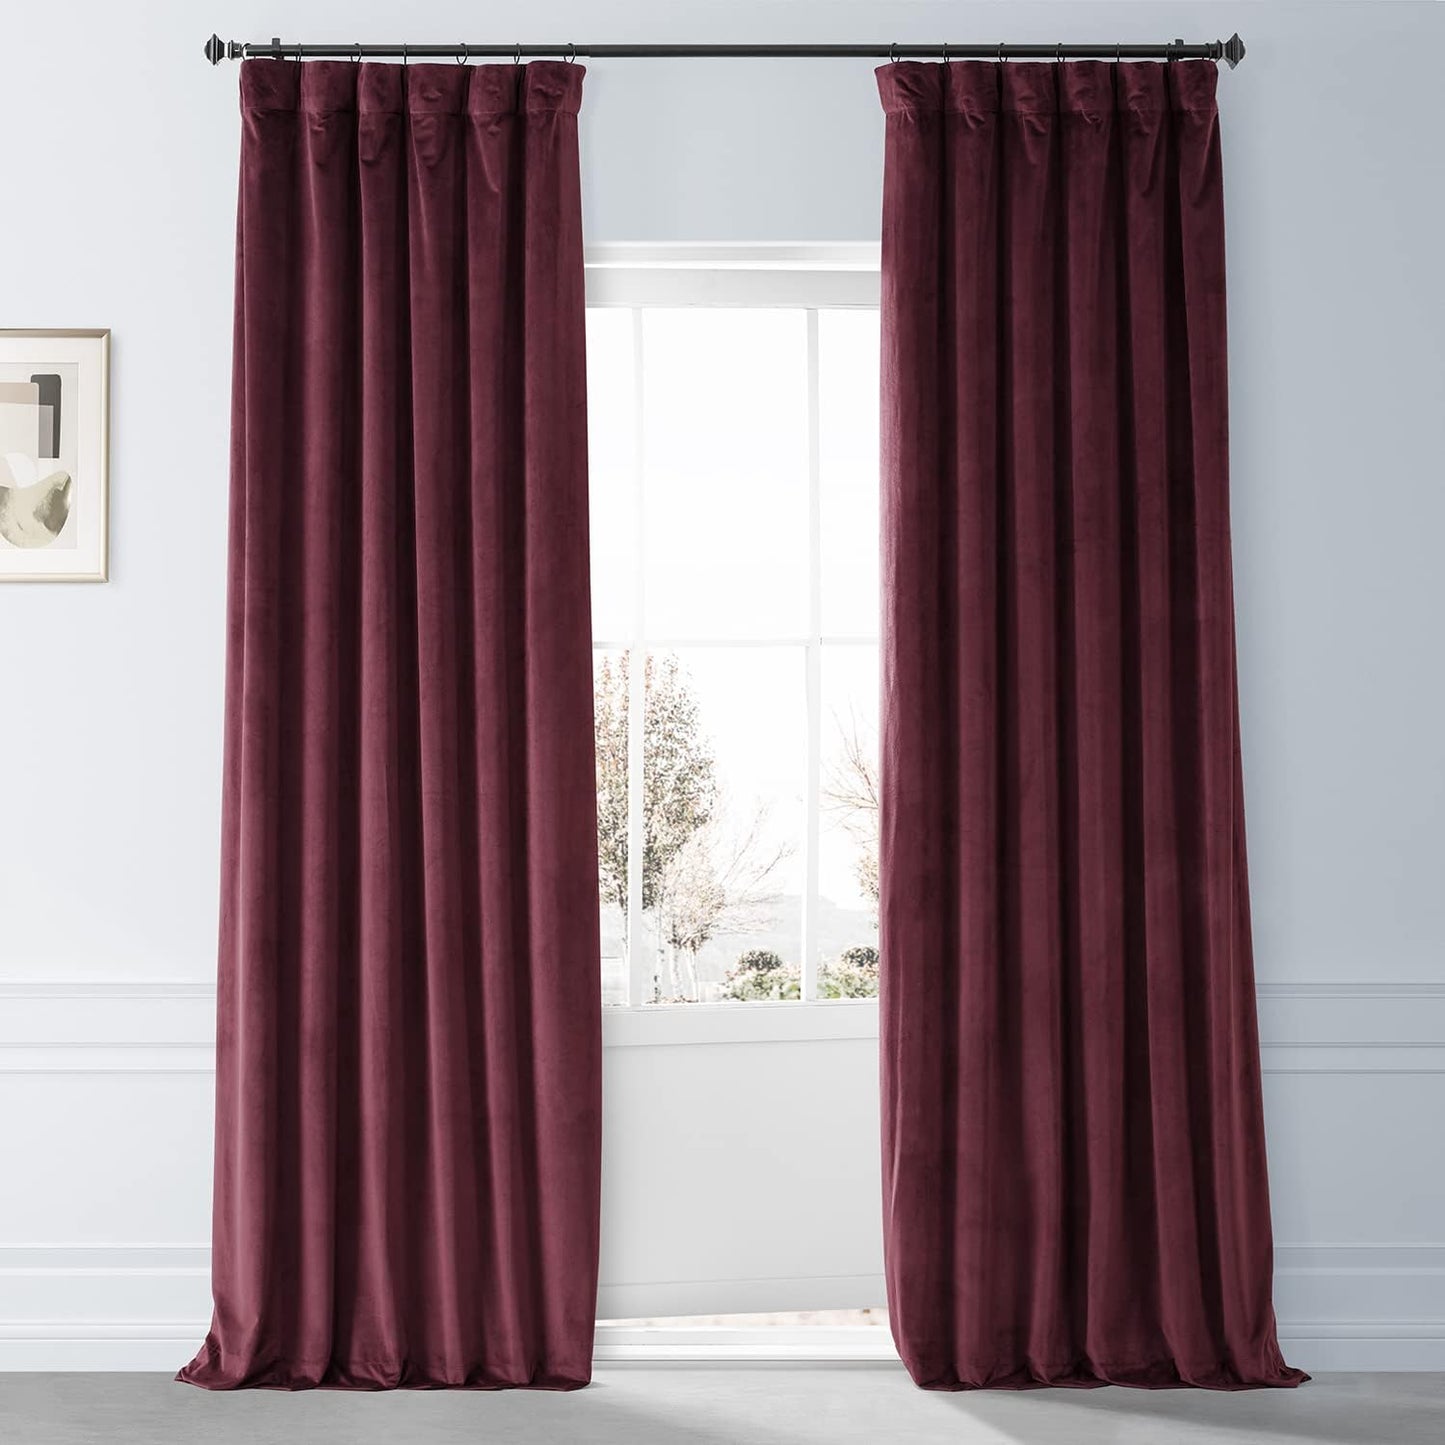 HPD HALF PRICE DRAPES Blackout Solid Thermal Insulated Window Curtain 50 X 96 Signature Plush Velvet Curtains for Bedroom & Living Room (1 Panel), VPYC-SBO198593-96, Diva Cream  Exclusive Fabrics & Furnishings Pomegranate Juice 50 X 108 